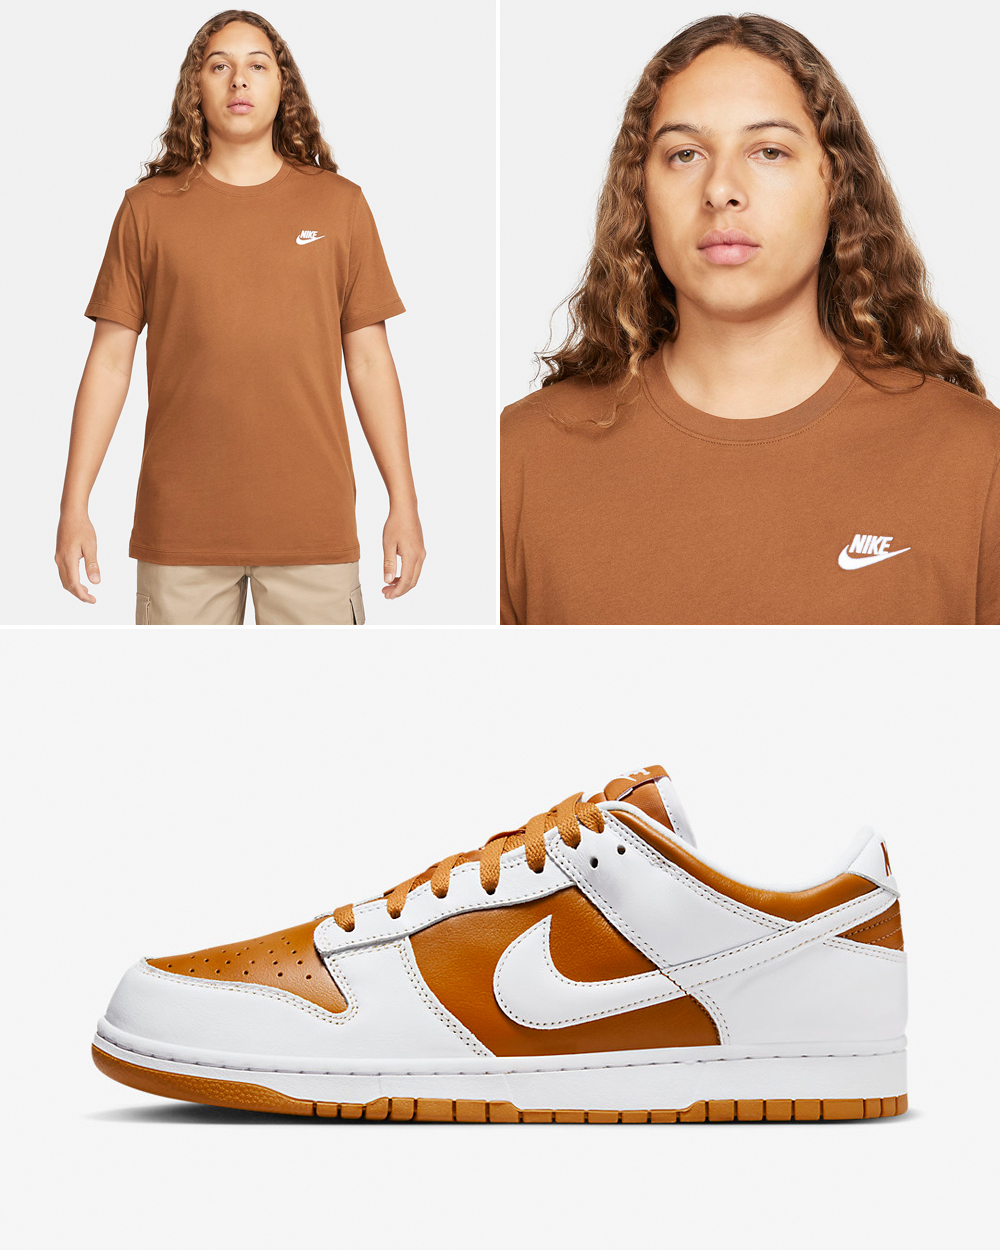 Nike-Dunk-Low-Reverse-Curry-Matching-T-Shirt-Outfit